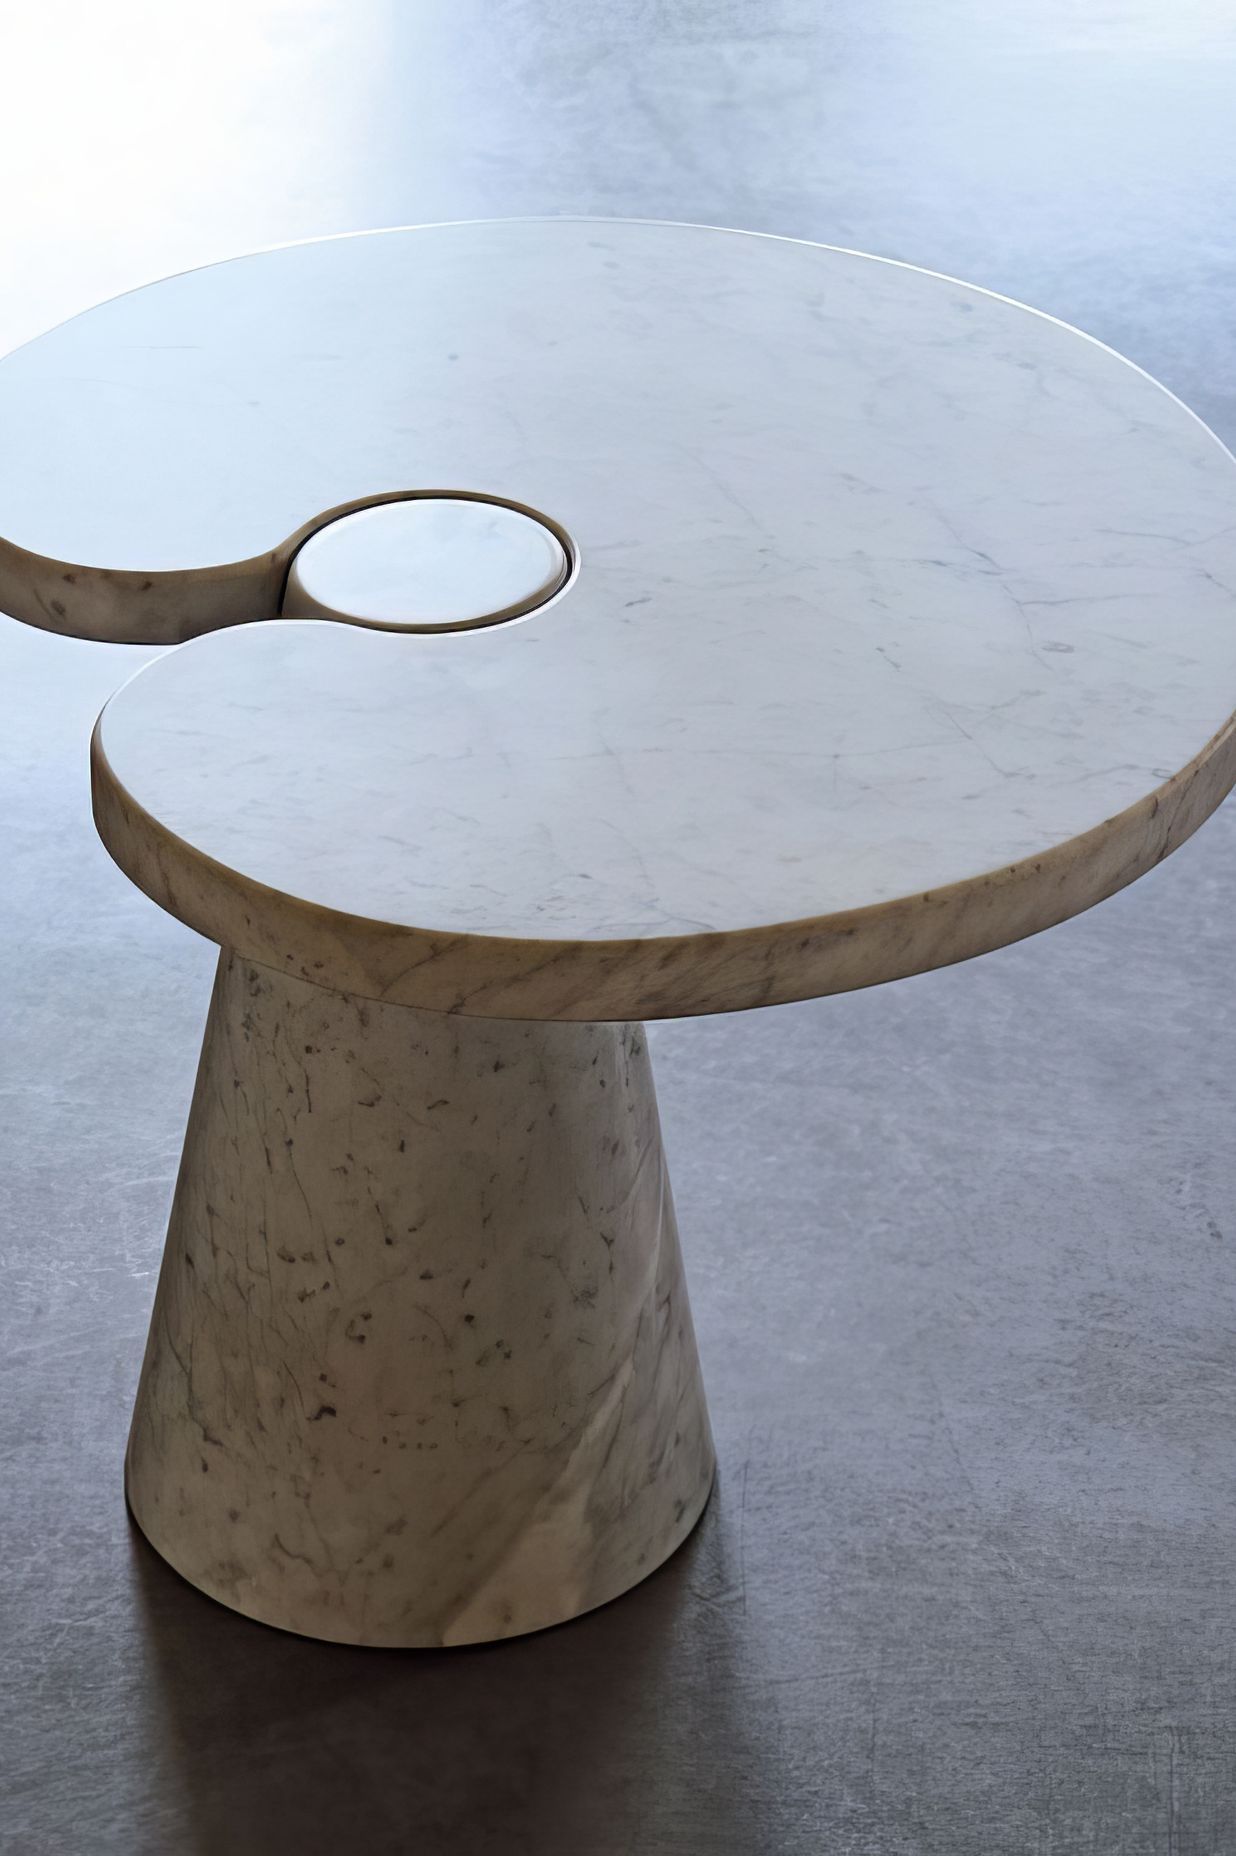 Eros table in Bianco Carrara marble. Designed by Angelo Mangiarotti in 1990.